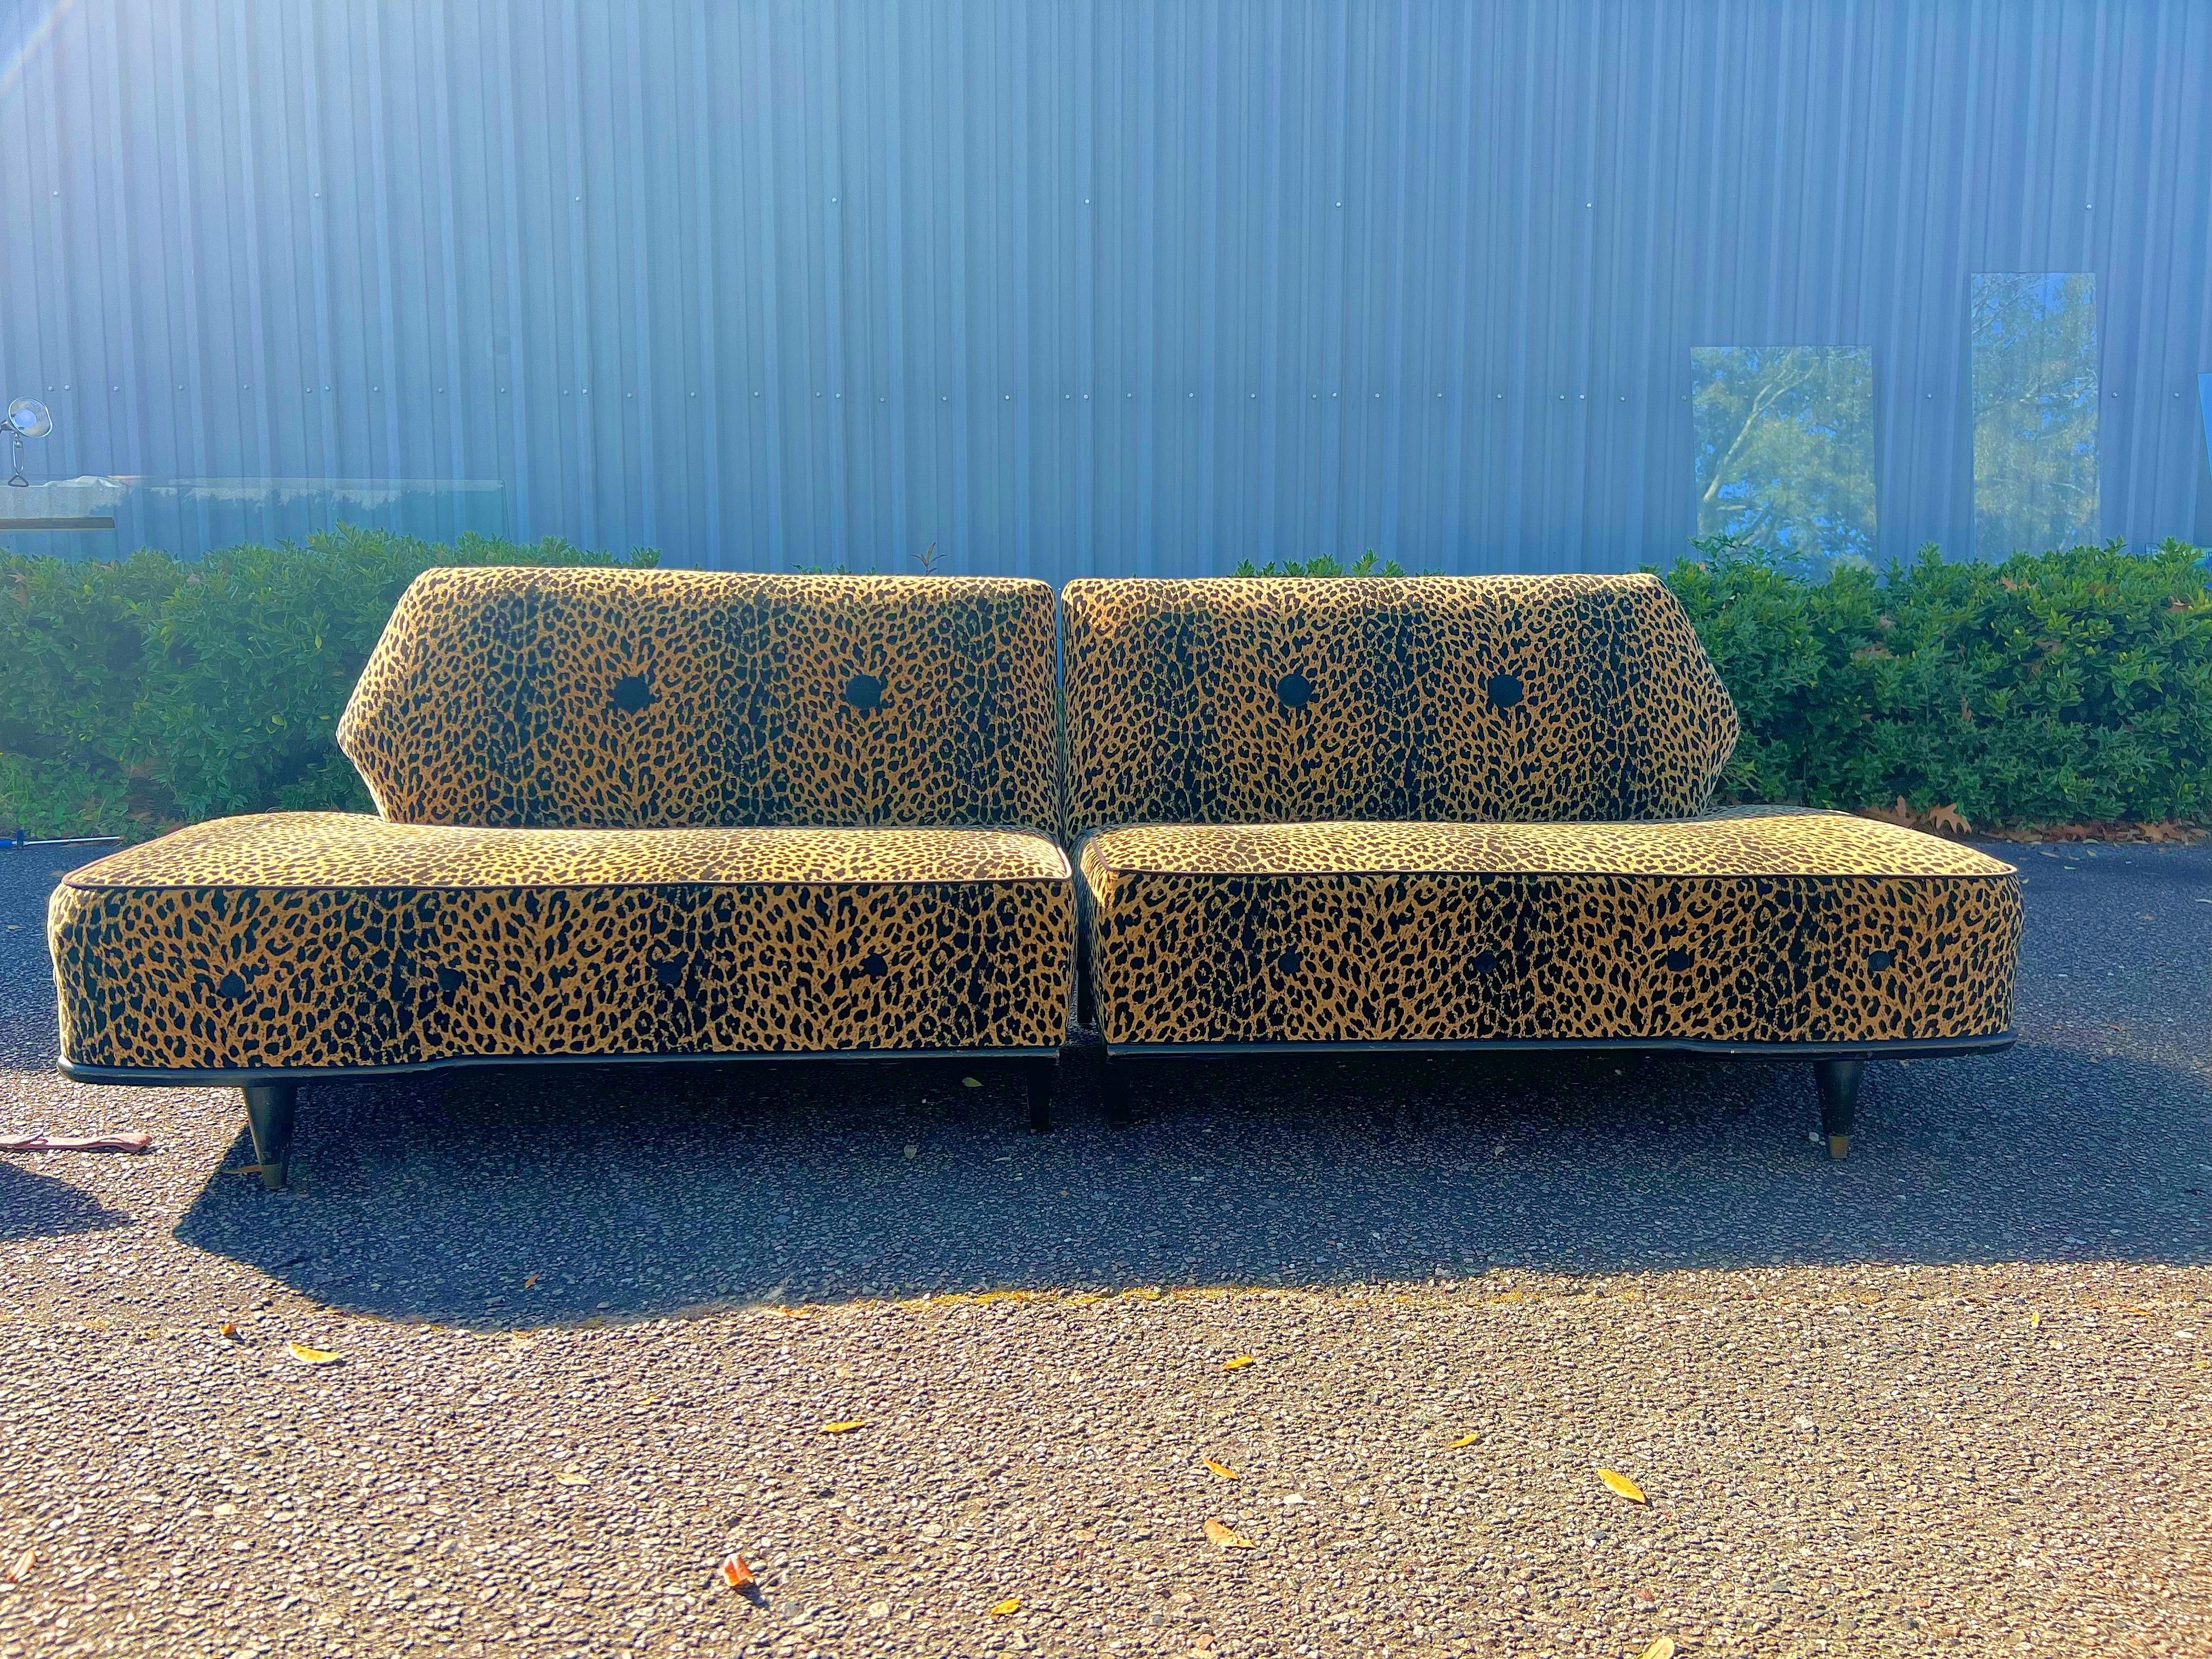 This stunning piece of American Mid-Century Modern early 1950s Biomorphic design for a sofa was re-upholstered in the 1980s and has been lounging in storage ever since. As a result the faux leopard fabric is in excellent condition and the black